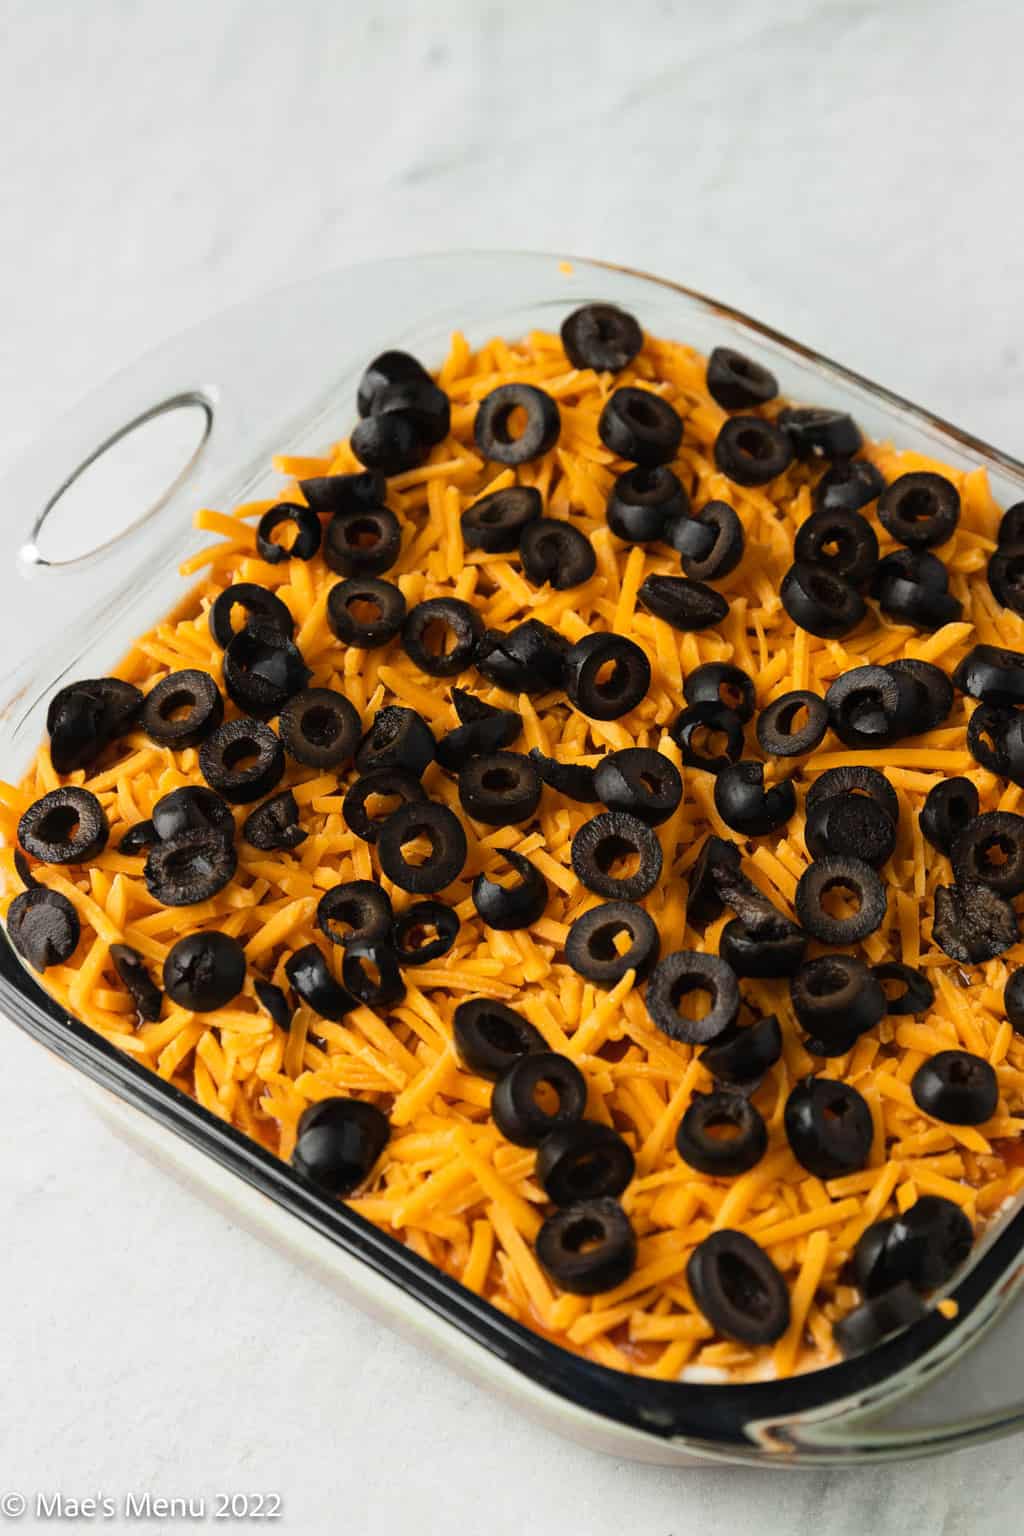 A clear dish of Mexican bean dip on a concrete counter.